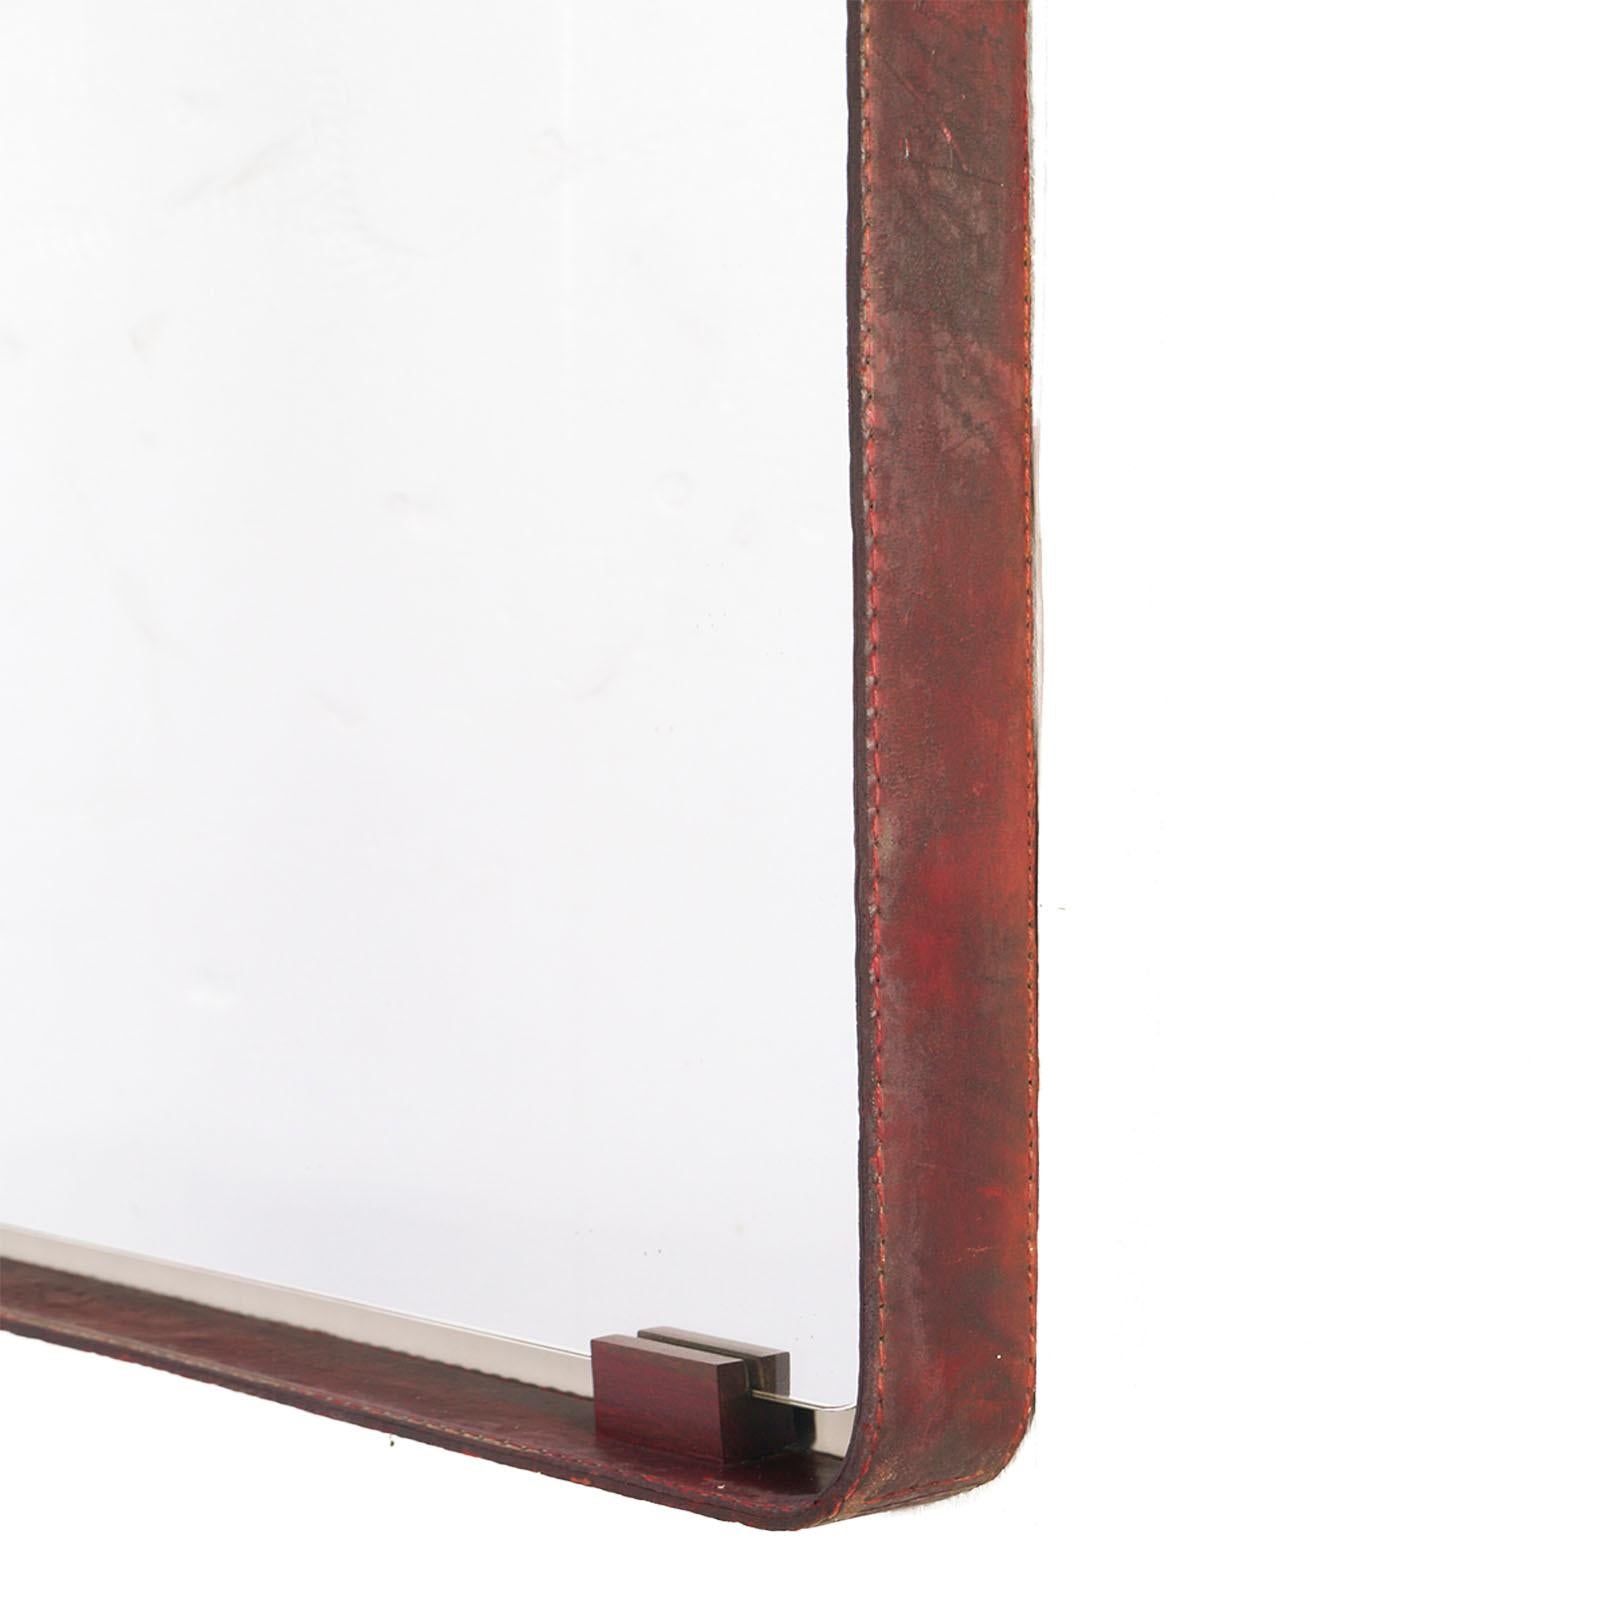 Mid-Century Modern 1950s Mirror, Steel Frame with Leather, Fontanit Branded Glass, by Fontana Arte